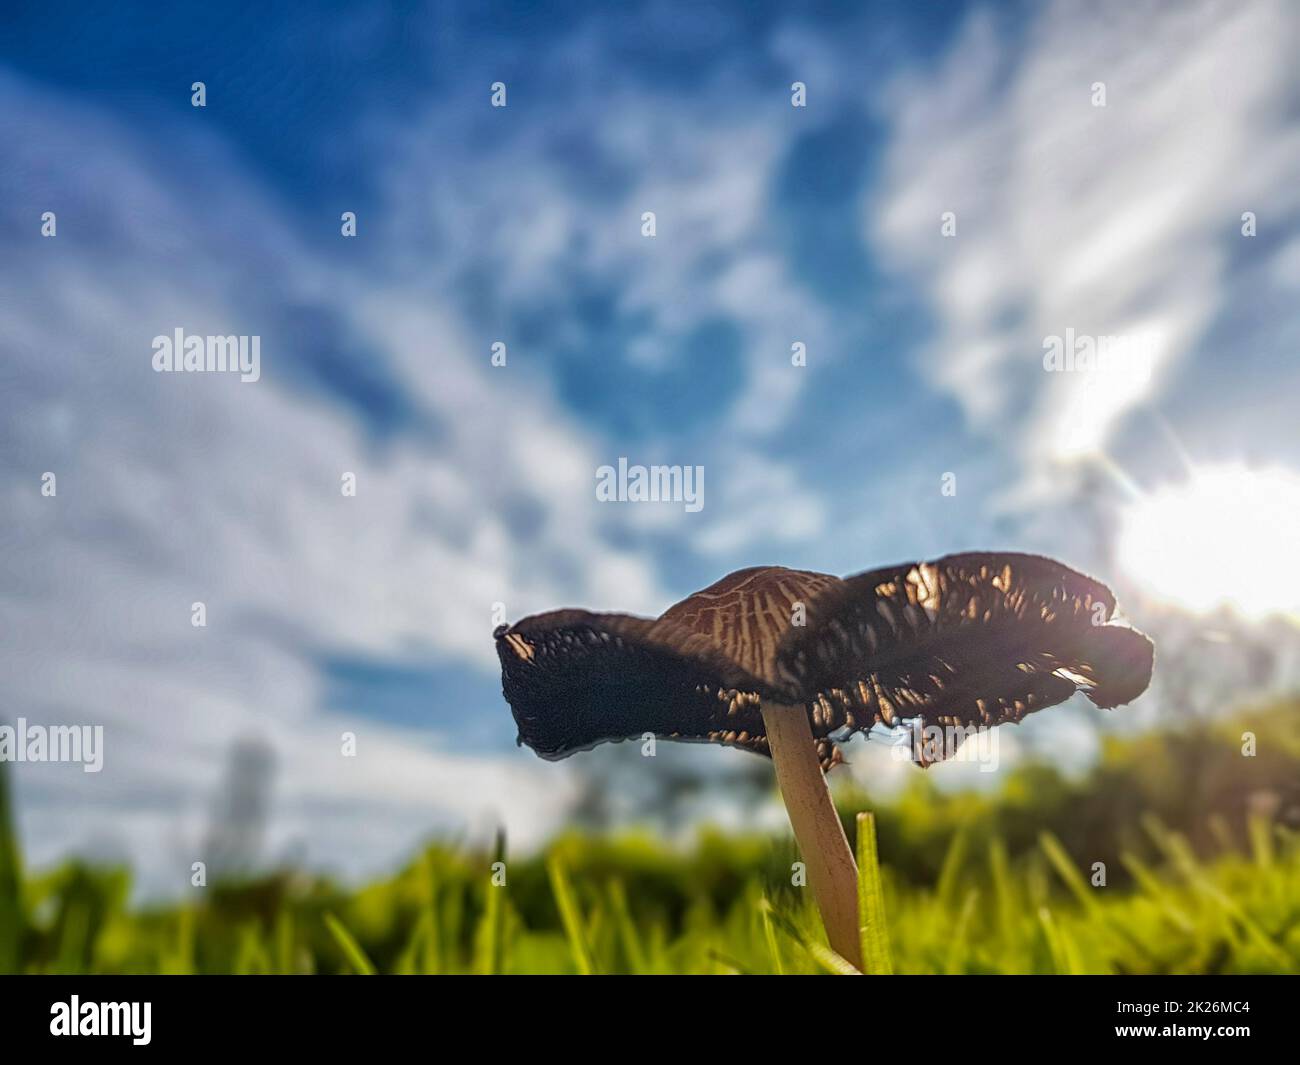 A small mushroom during a nice sunny day Stock Photo